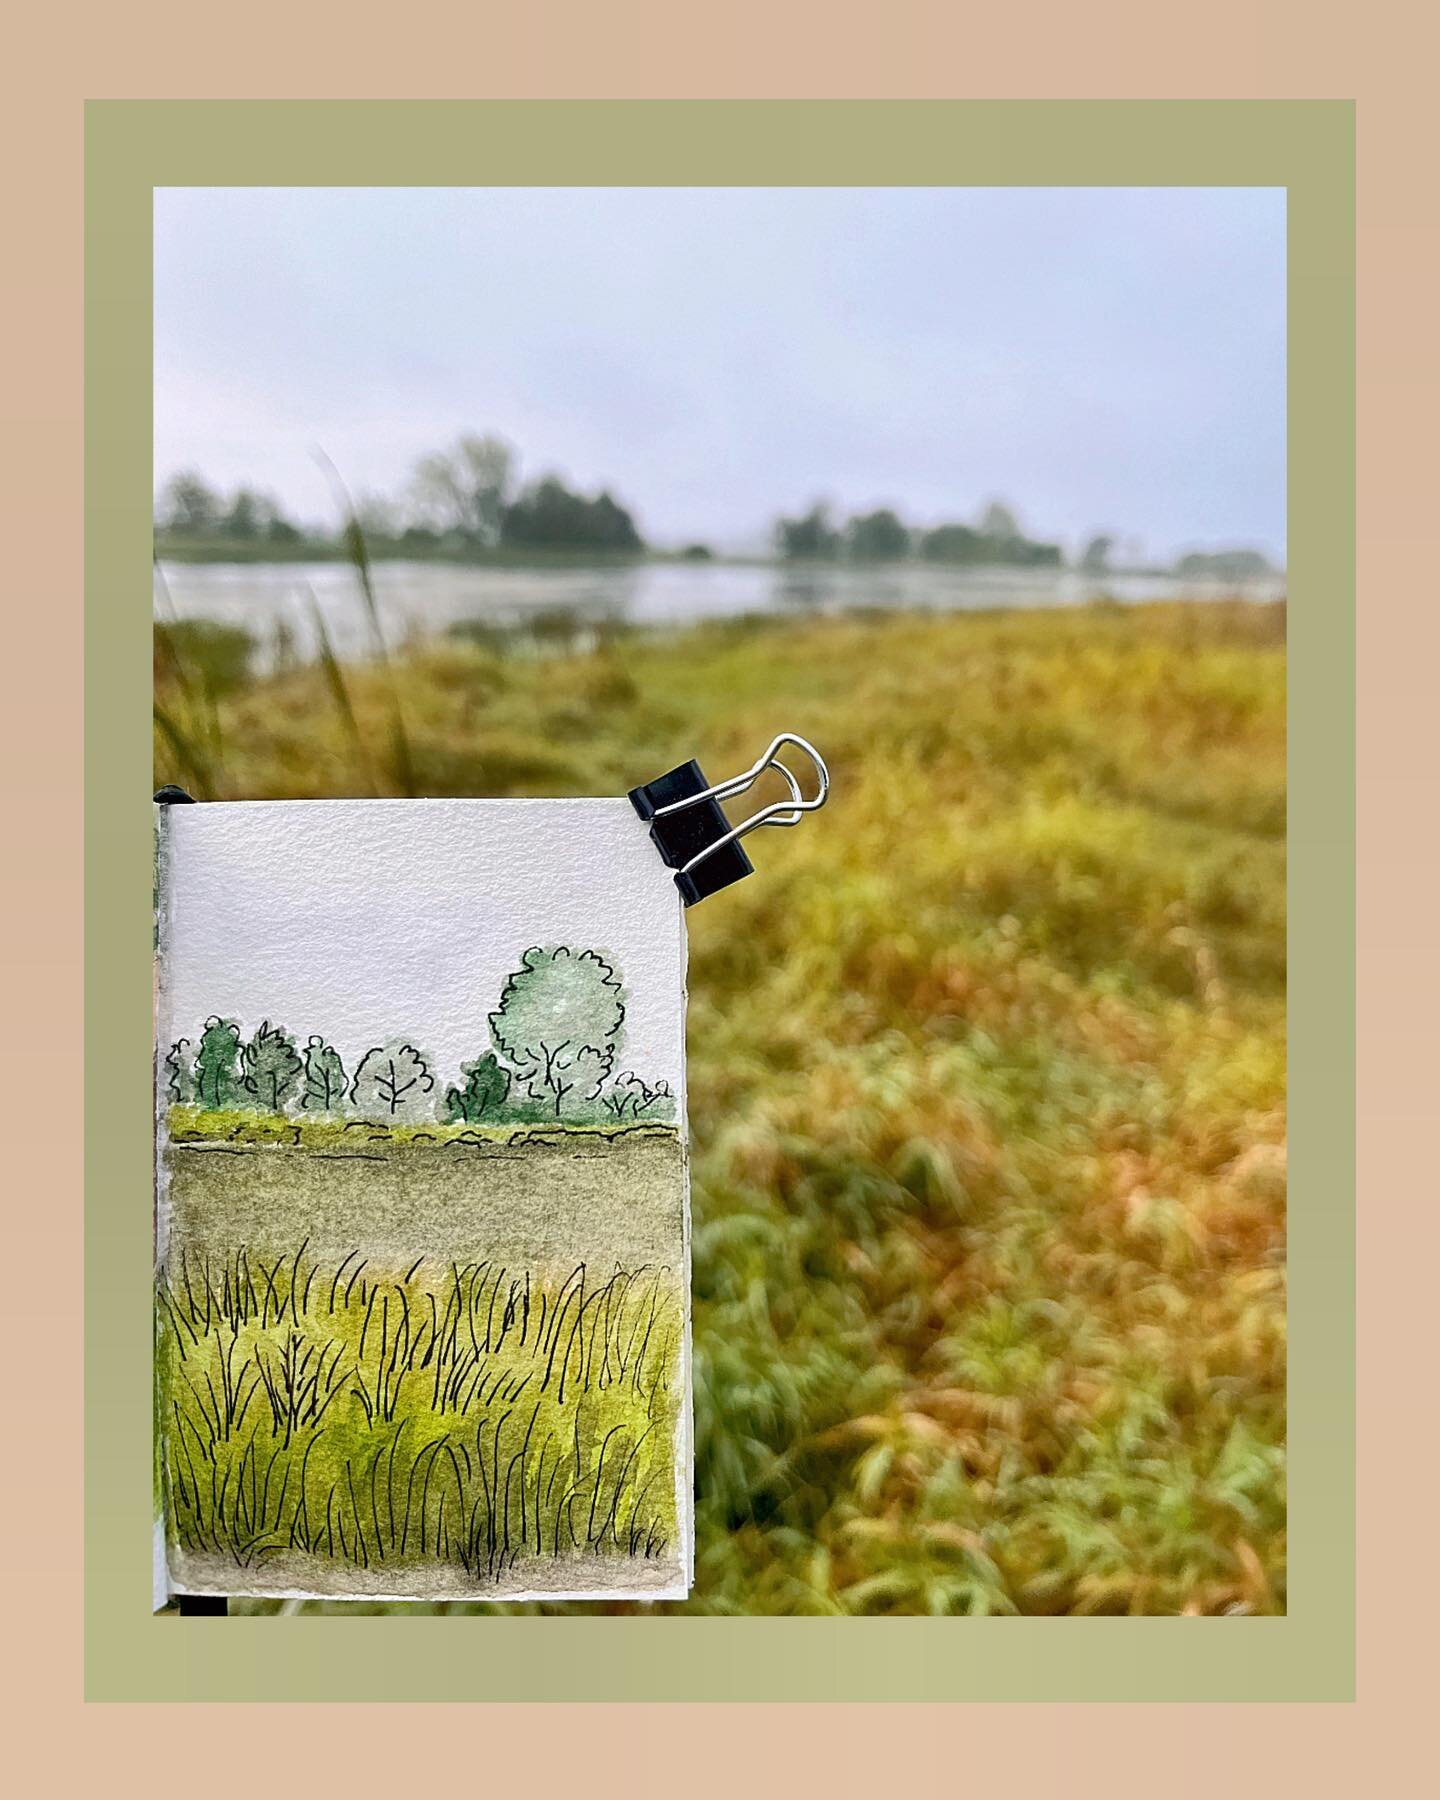 Beautiful end of summer morning at the marsh. 
.
.
.
Watercolour
.
.
.
.
.
#wetlandsconservation #quebec #naturelovers #watercolourart #watercolours #watercolorpainting #marshland #naturepainting #pleinairpainting #pleinair